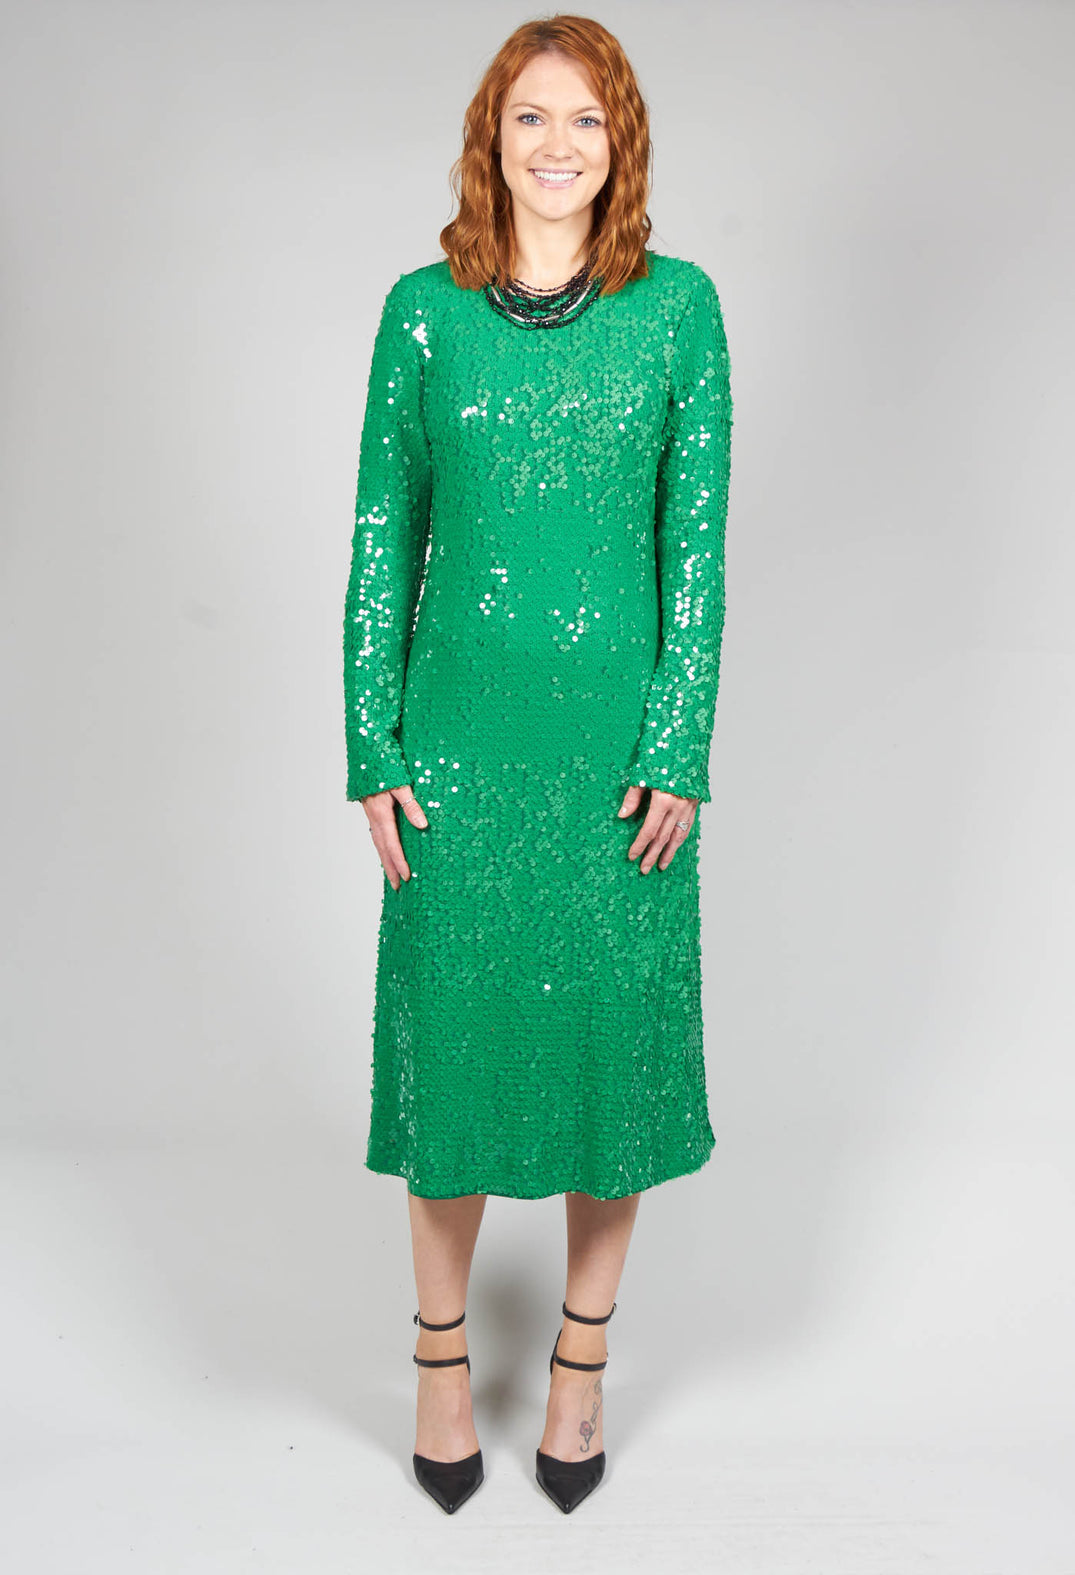 lady smiling wearing a long green sequin dress